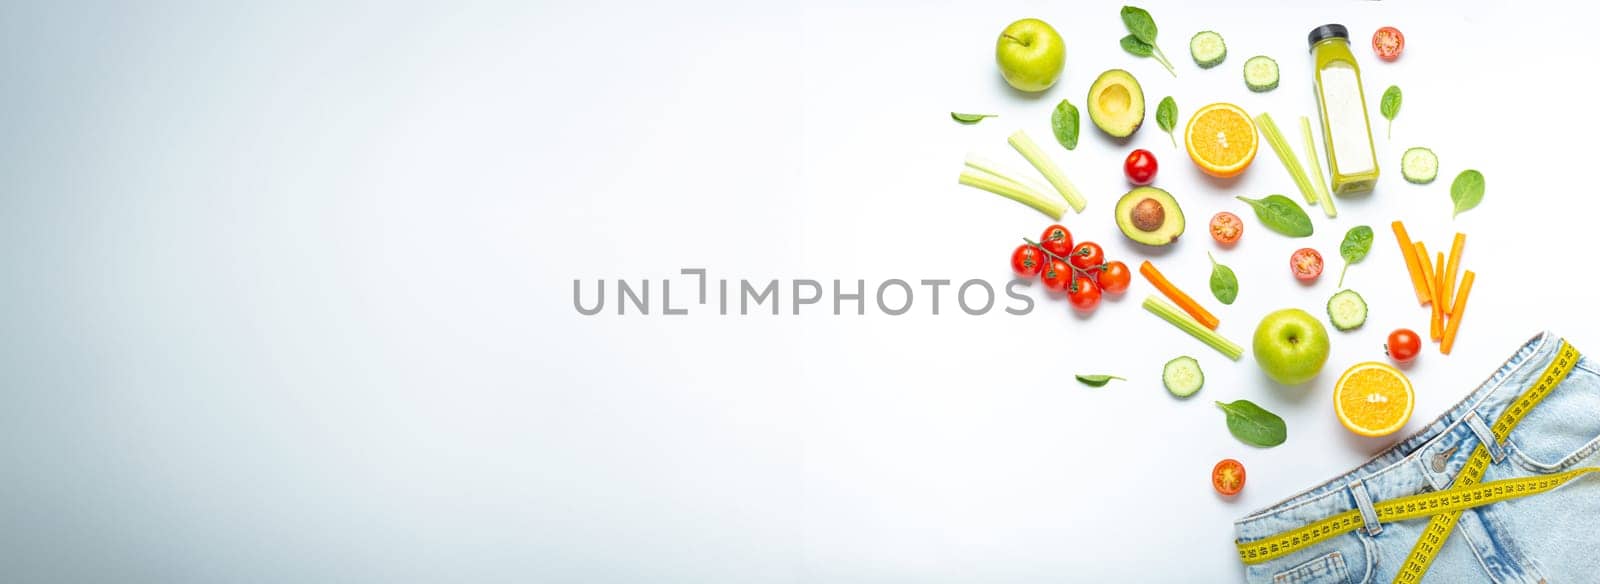 Fresh fruit, vegetables, smoothie falling into jeans and yellow measuring tape instead of belt on white background. Concept of weight loss, detox, diet, healthy clean nutrition, copy space